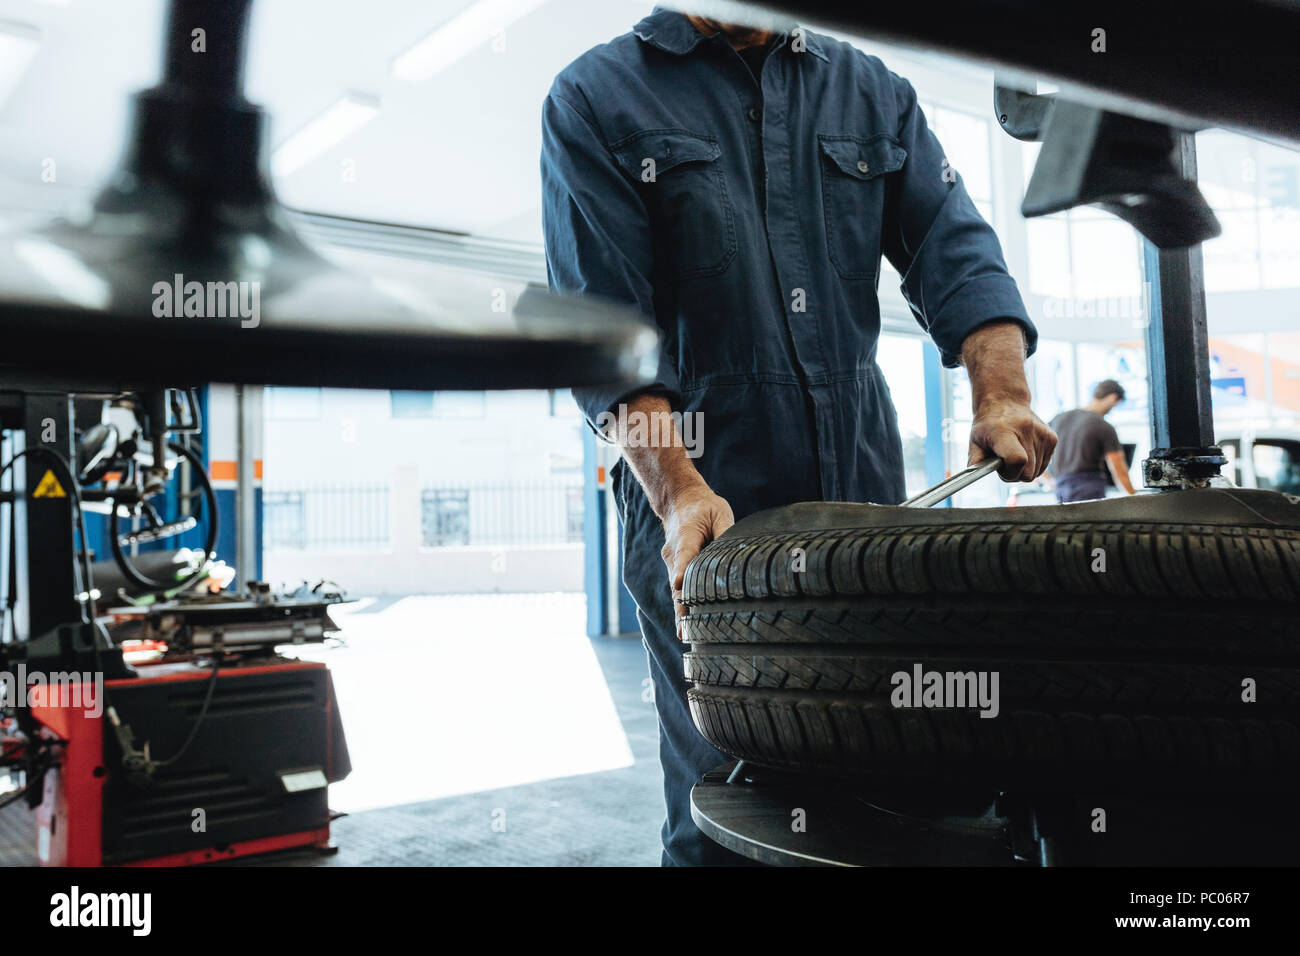 Mechanic removes car tire service station. Man working on machine for removing rubber from the wheel disc. Stock Photo